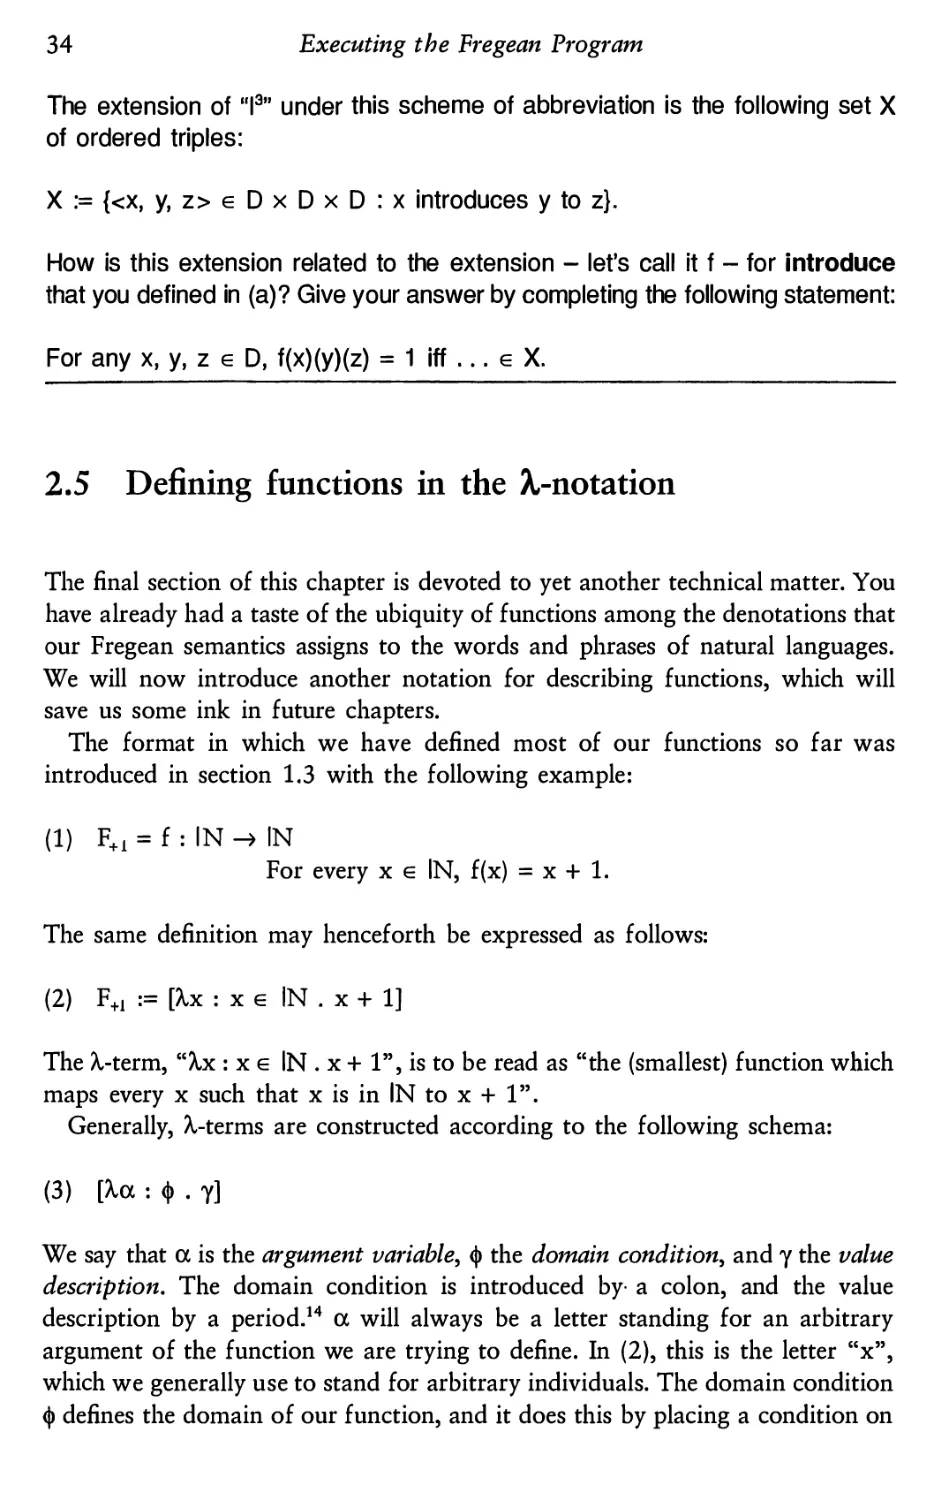 2.5 Defining functions in the λ-notation